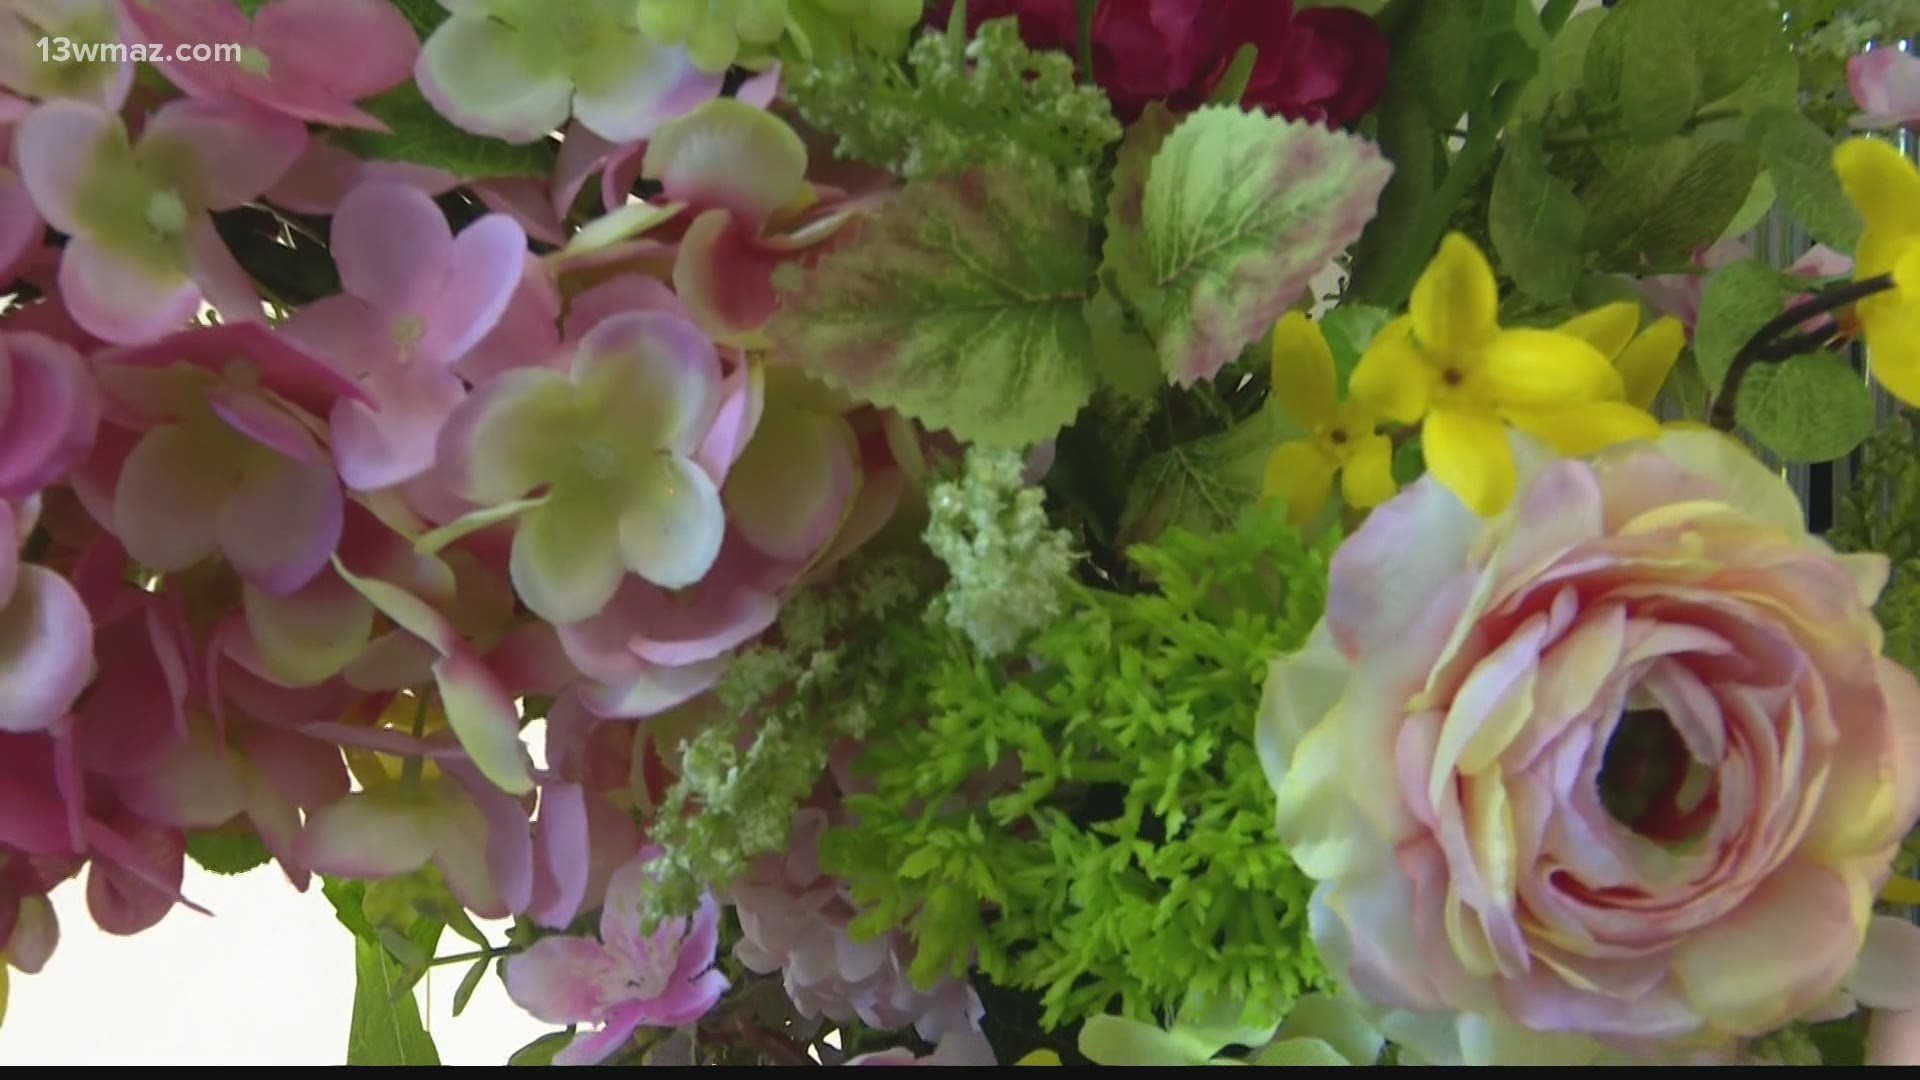 If you are looking for some flowers for the mom in your life, a Central Georgia florist says "invest in local businesses."